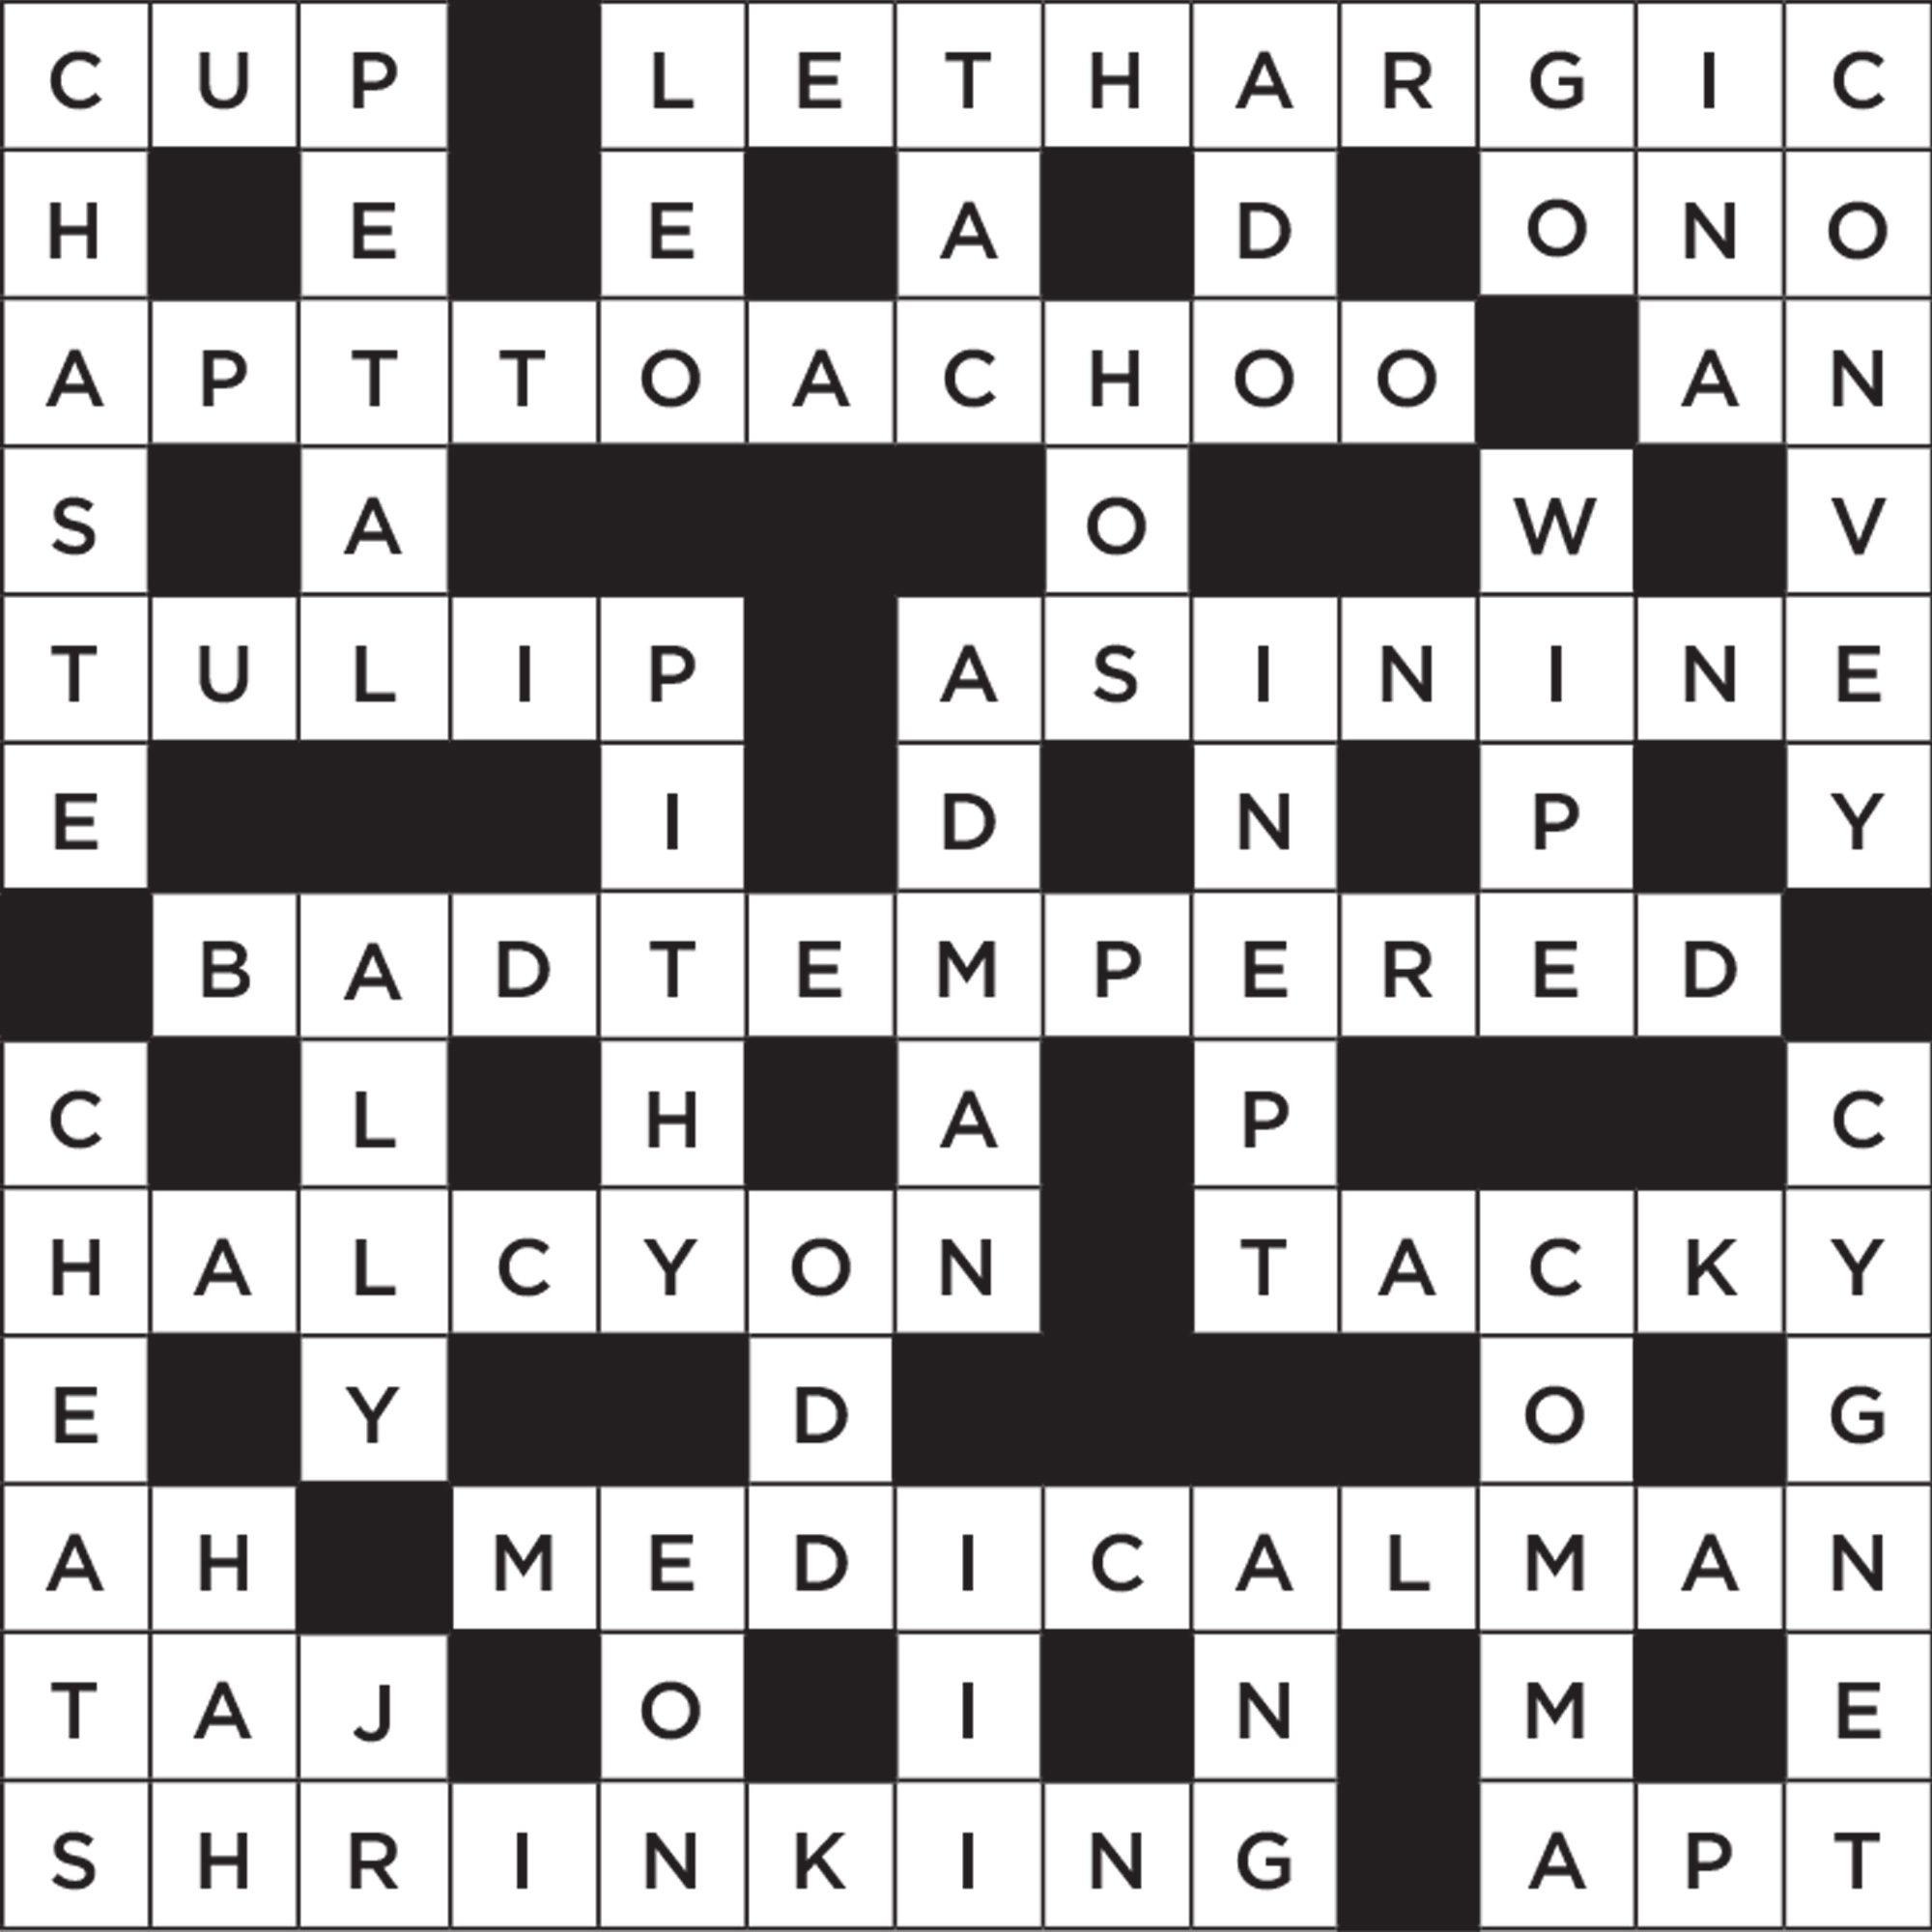 Printable Universal Crossword Puzzle Today / If you get stumped on any